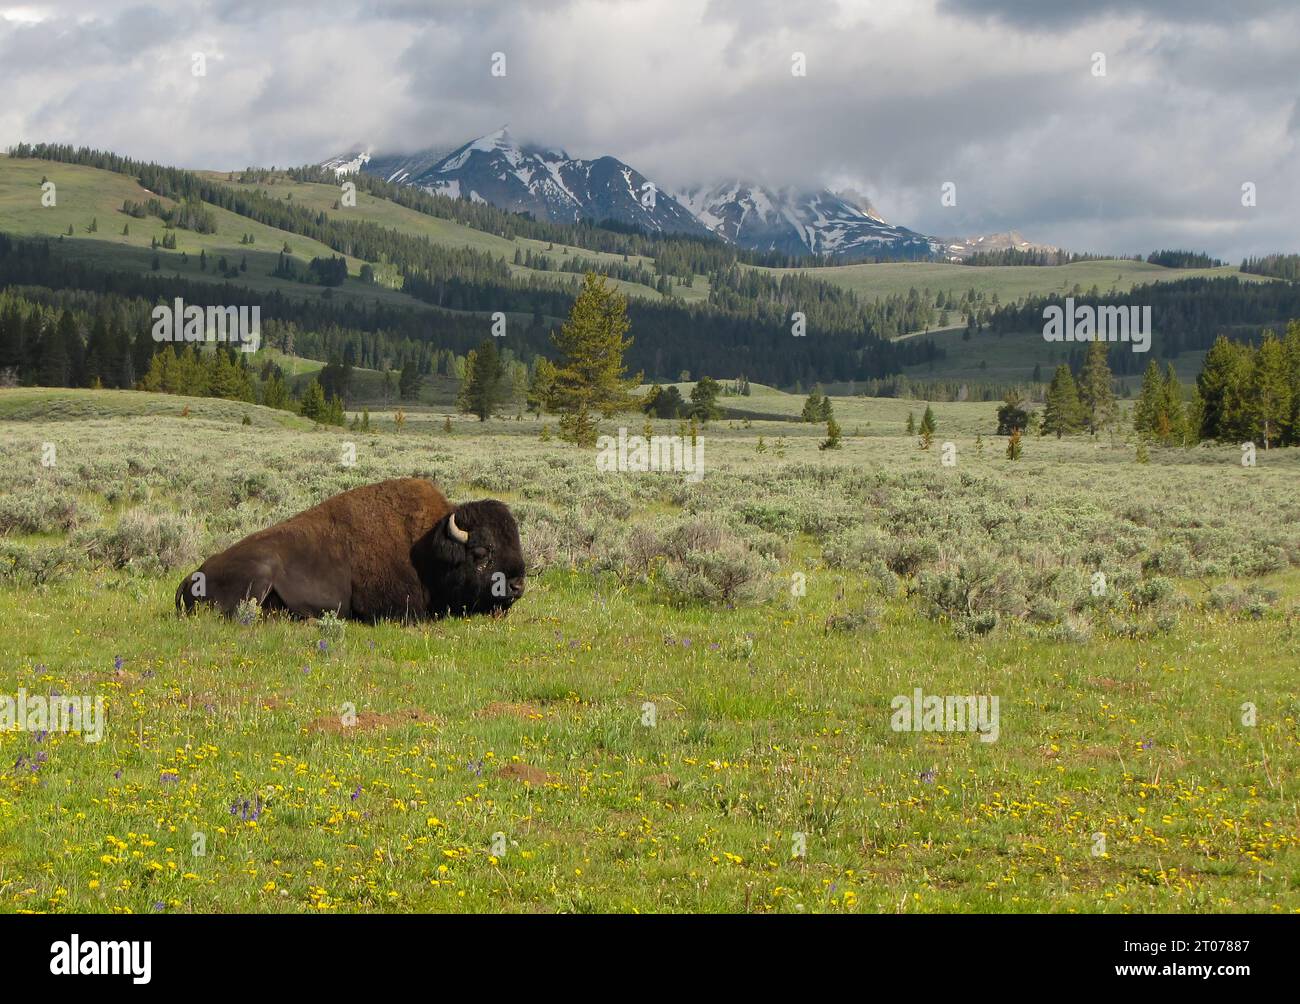 One buffalo bison resting on the prairie grass with the hills and mountains of Montana and Wyoming in the background with snow-caps. Stock Photo